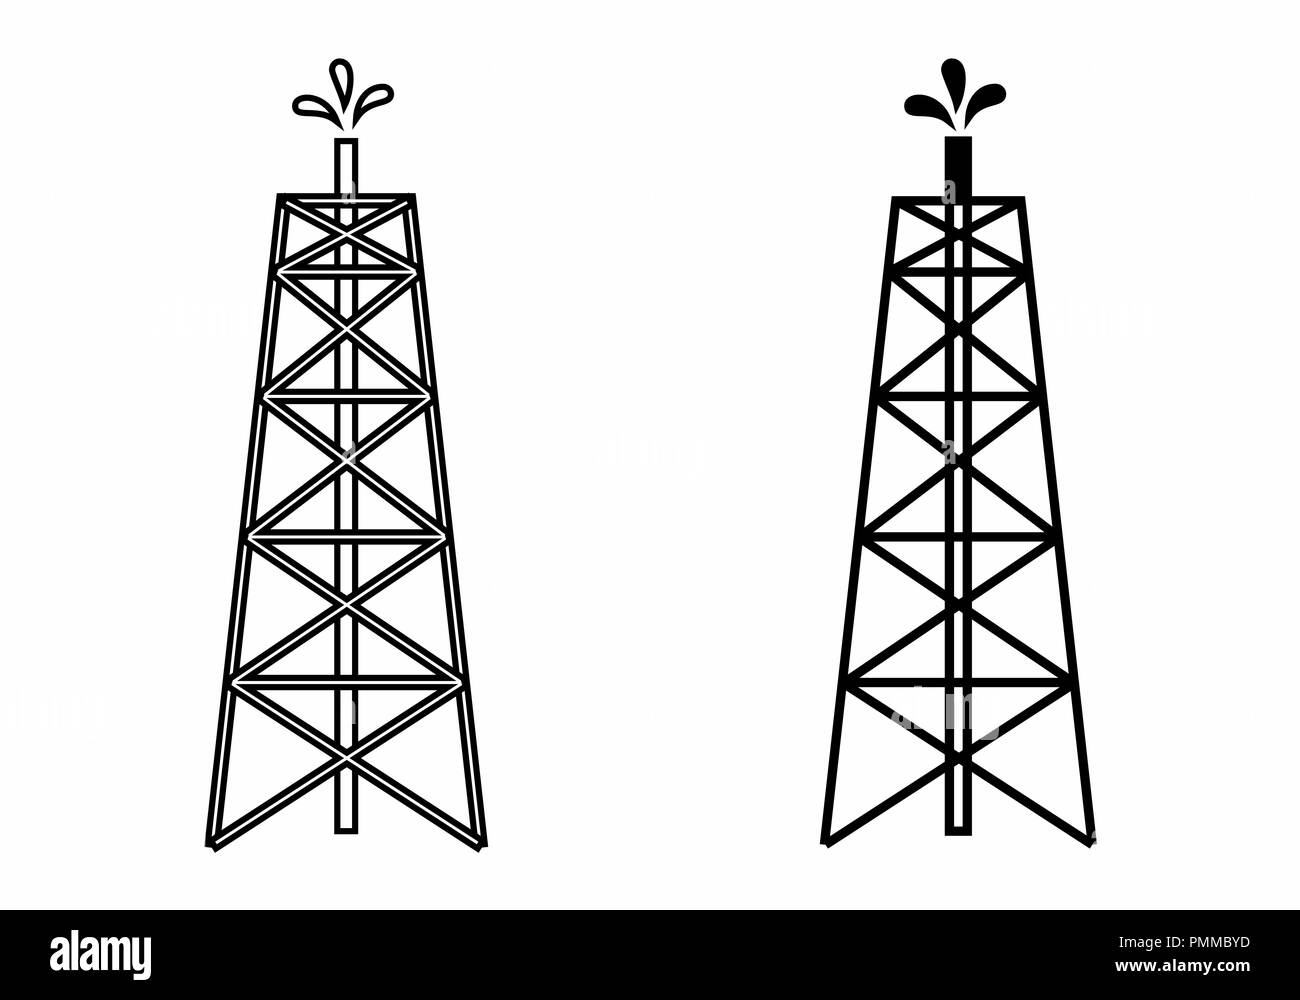 Illustration of oil towers on white background Stock Vector